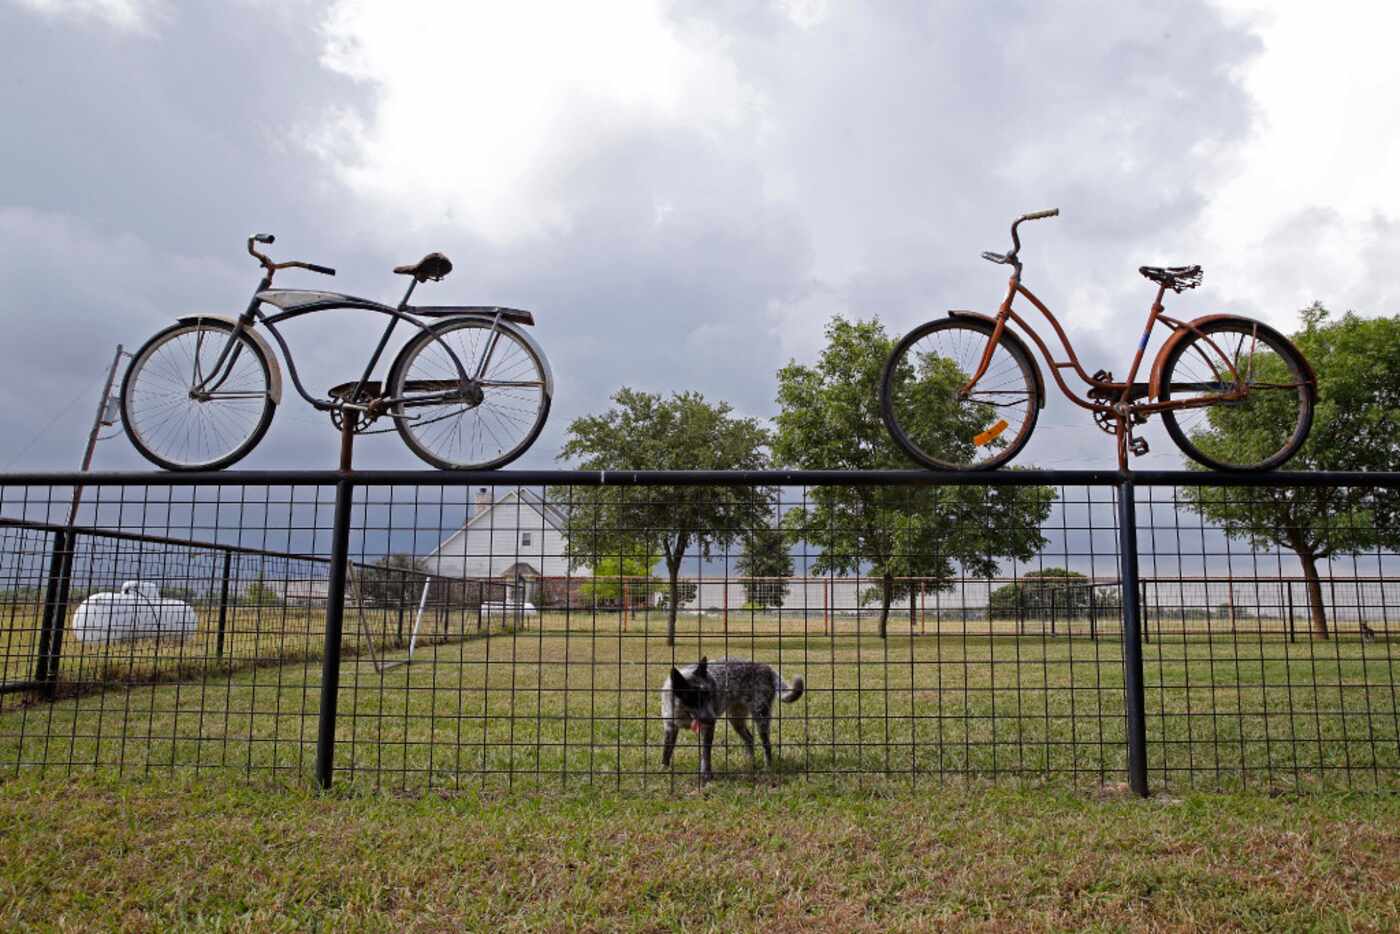 A fence at Golden Farms in Celina is decorated with bicycles.